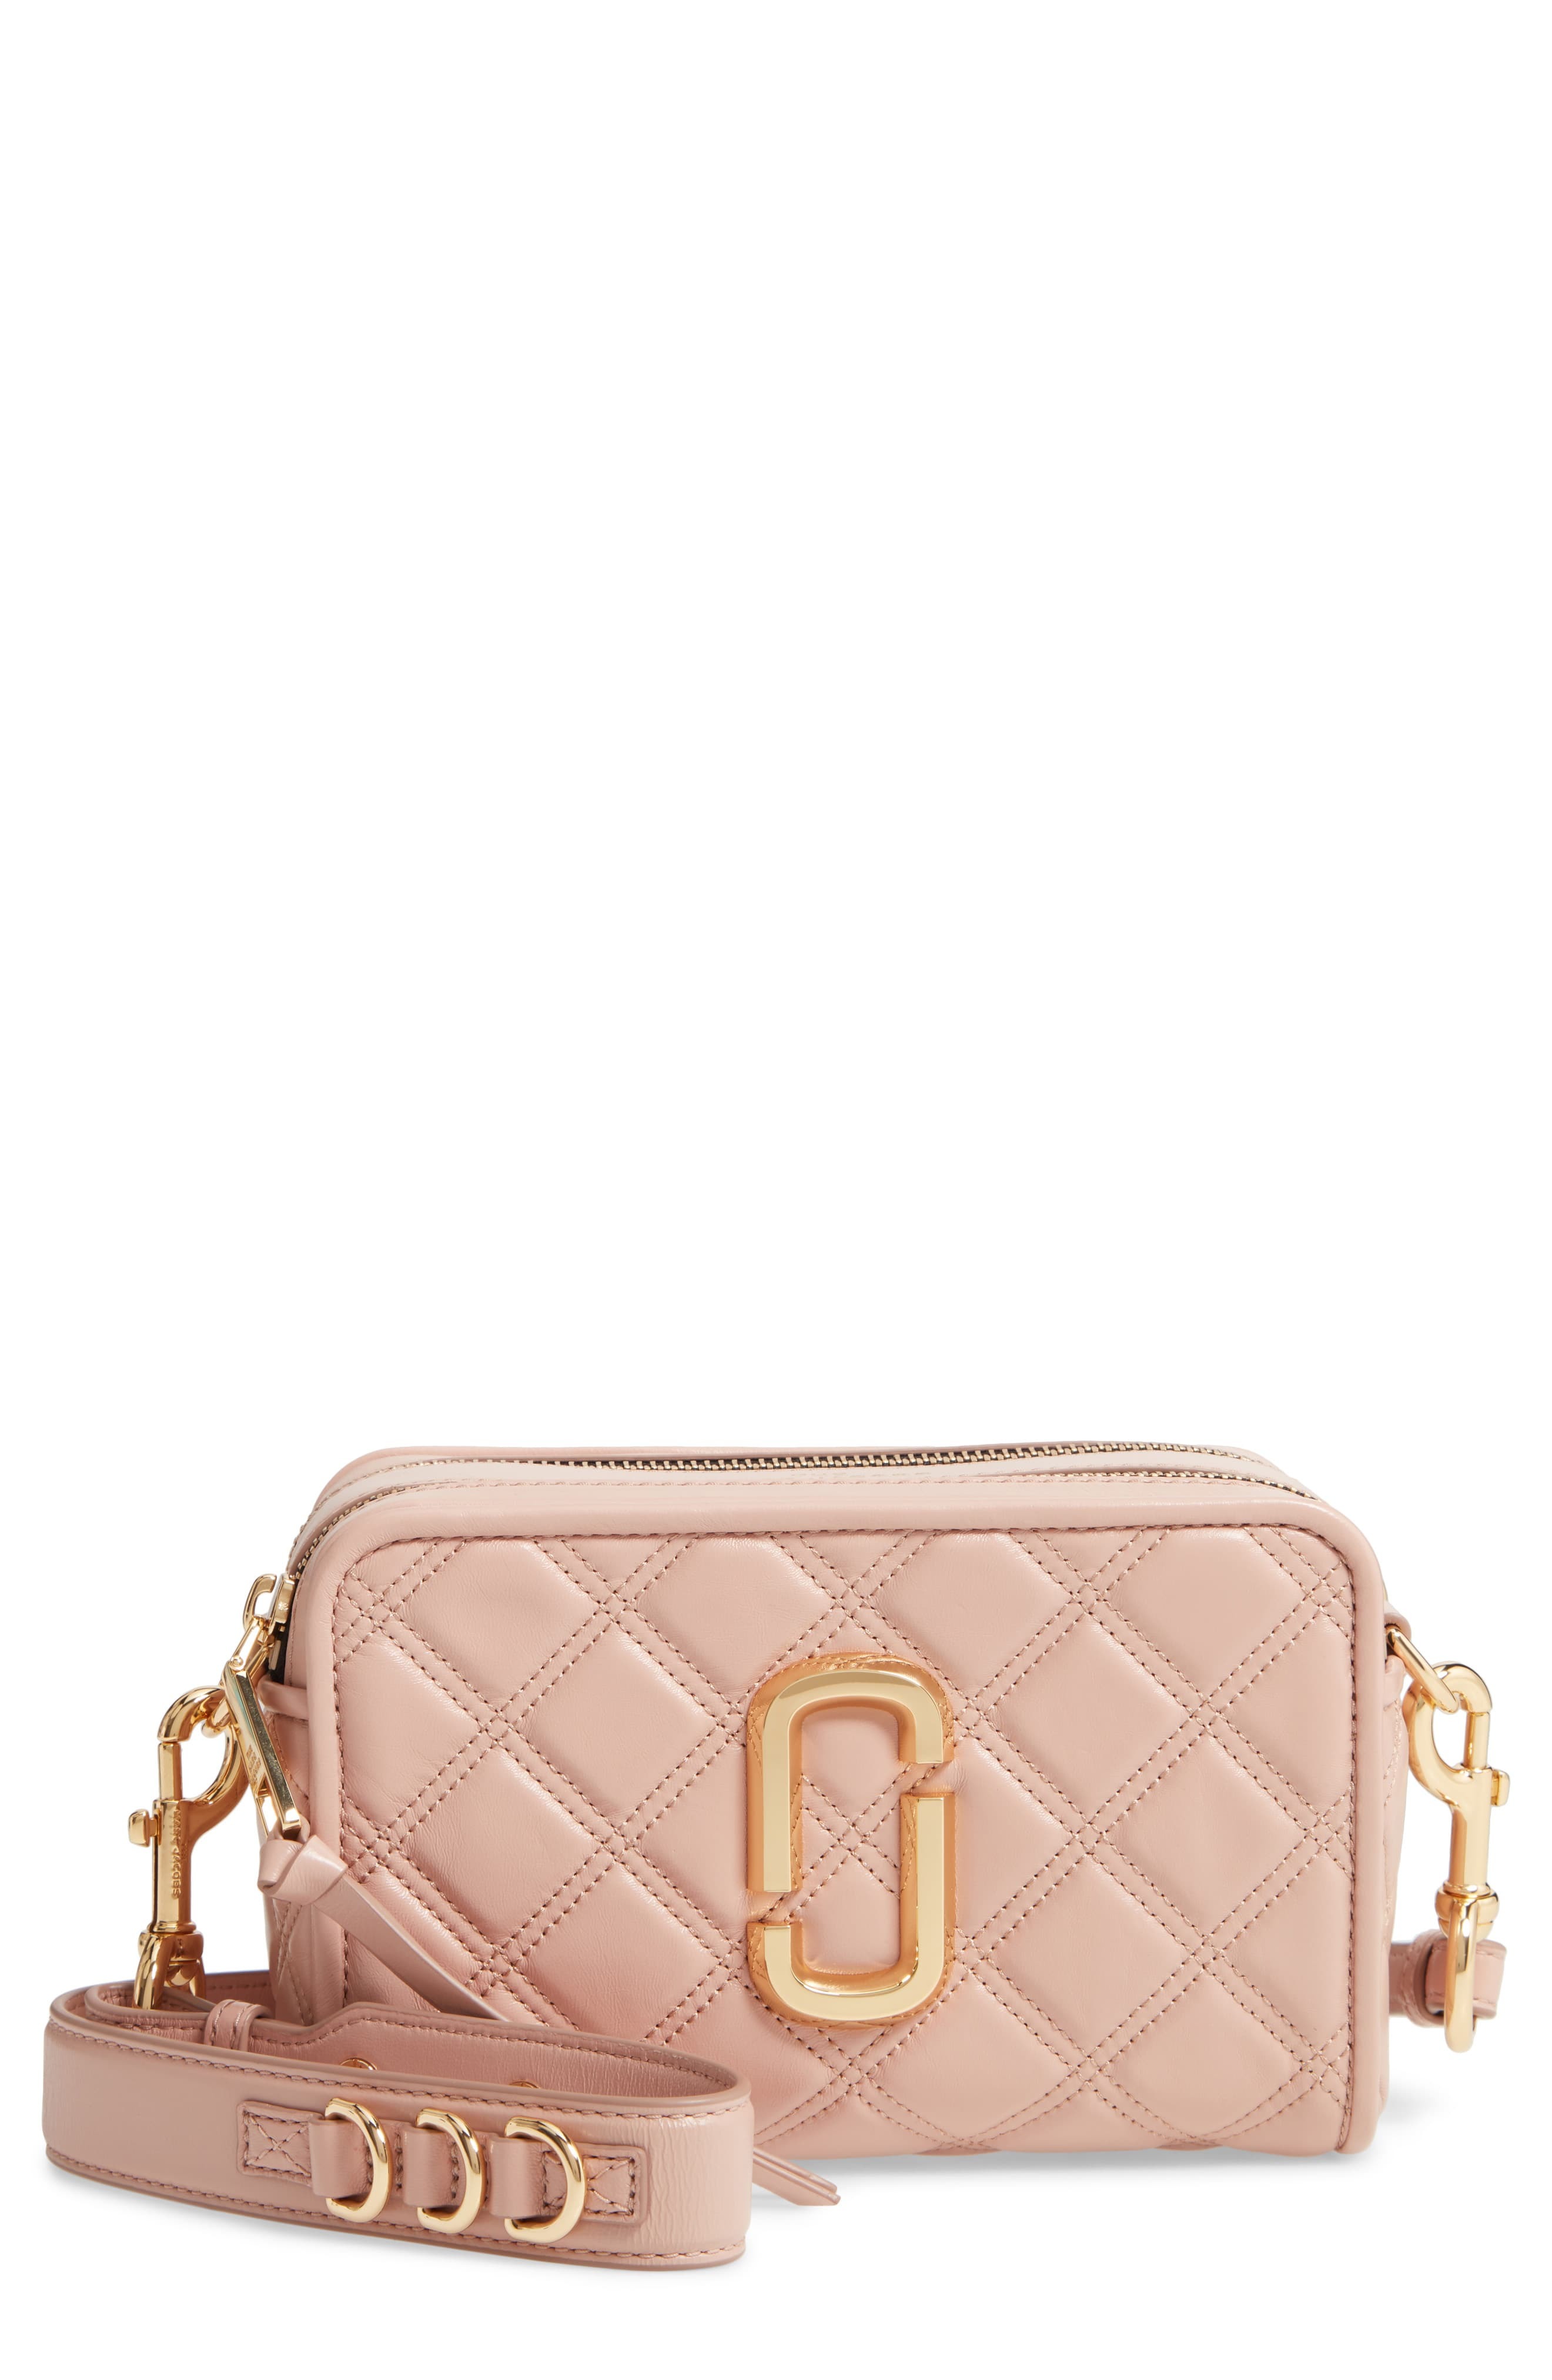 THE Quilted Softshot 21 - Marc Jacobs THE Quilted Softshot 21. This compact  quilted-leather handbag packs a major style punch with gleaming…